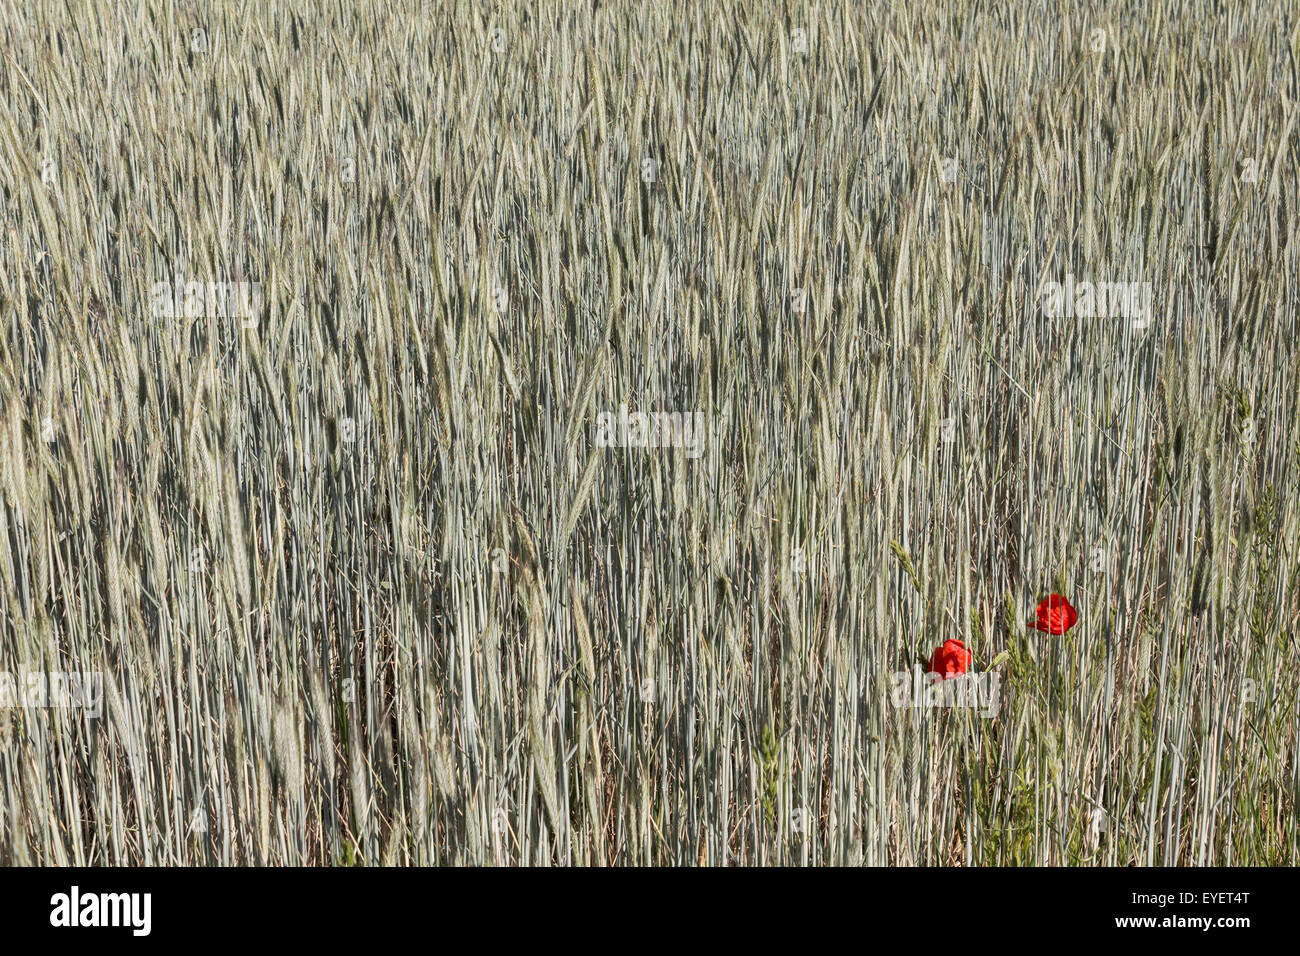 wheat field and poppy flowers -poppies, cereals Stock Photo